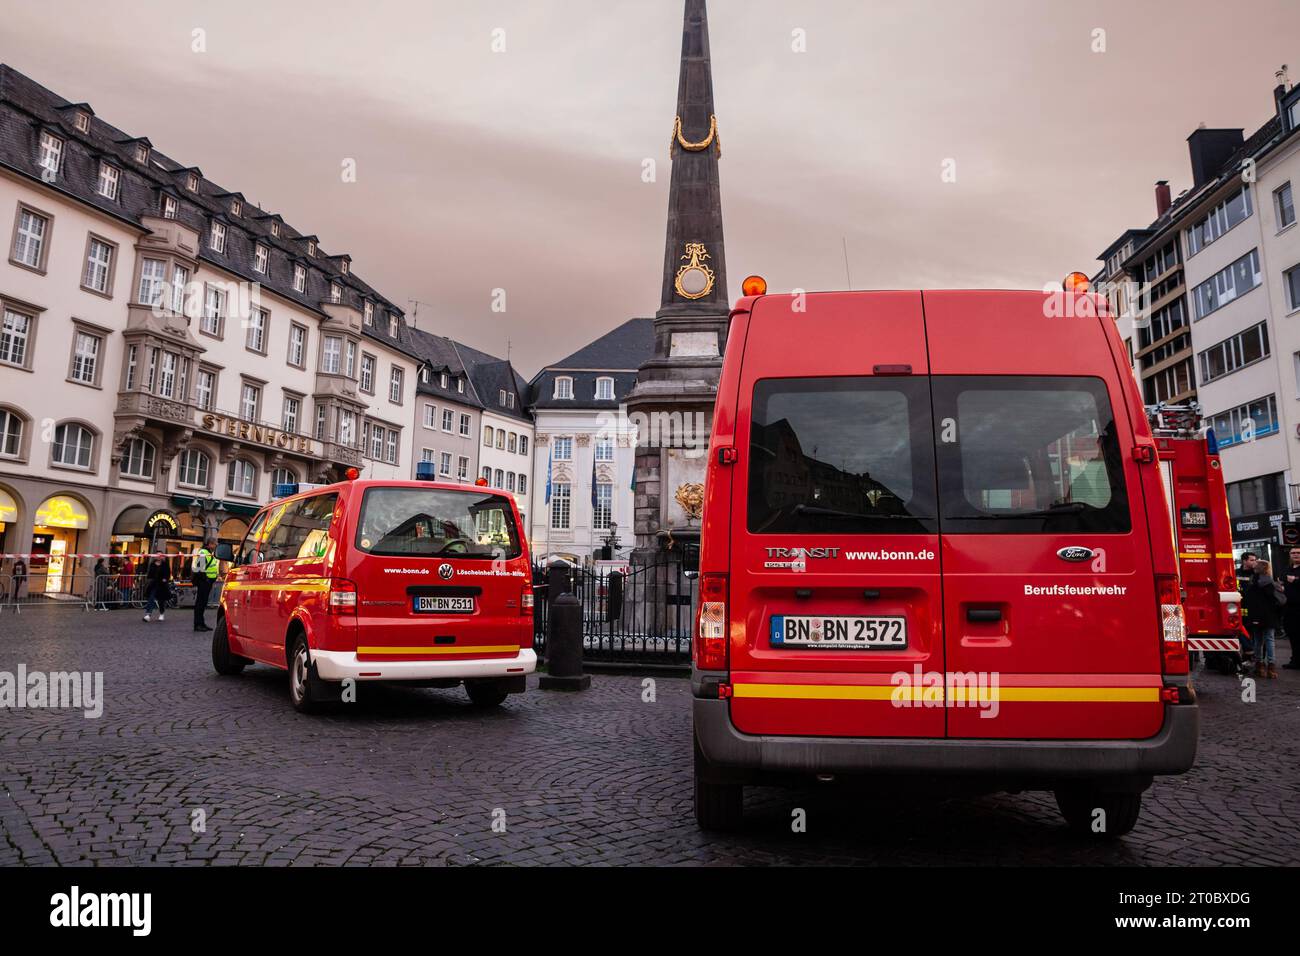 Picture of an emergency vehicle of Feuerwehr, the german firefighters, in Bonn, Germany. Stock Photo